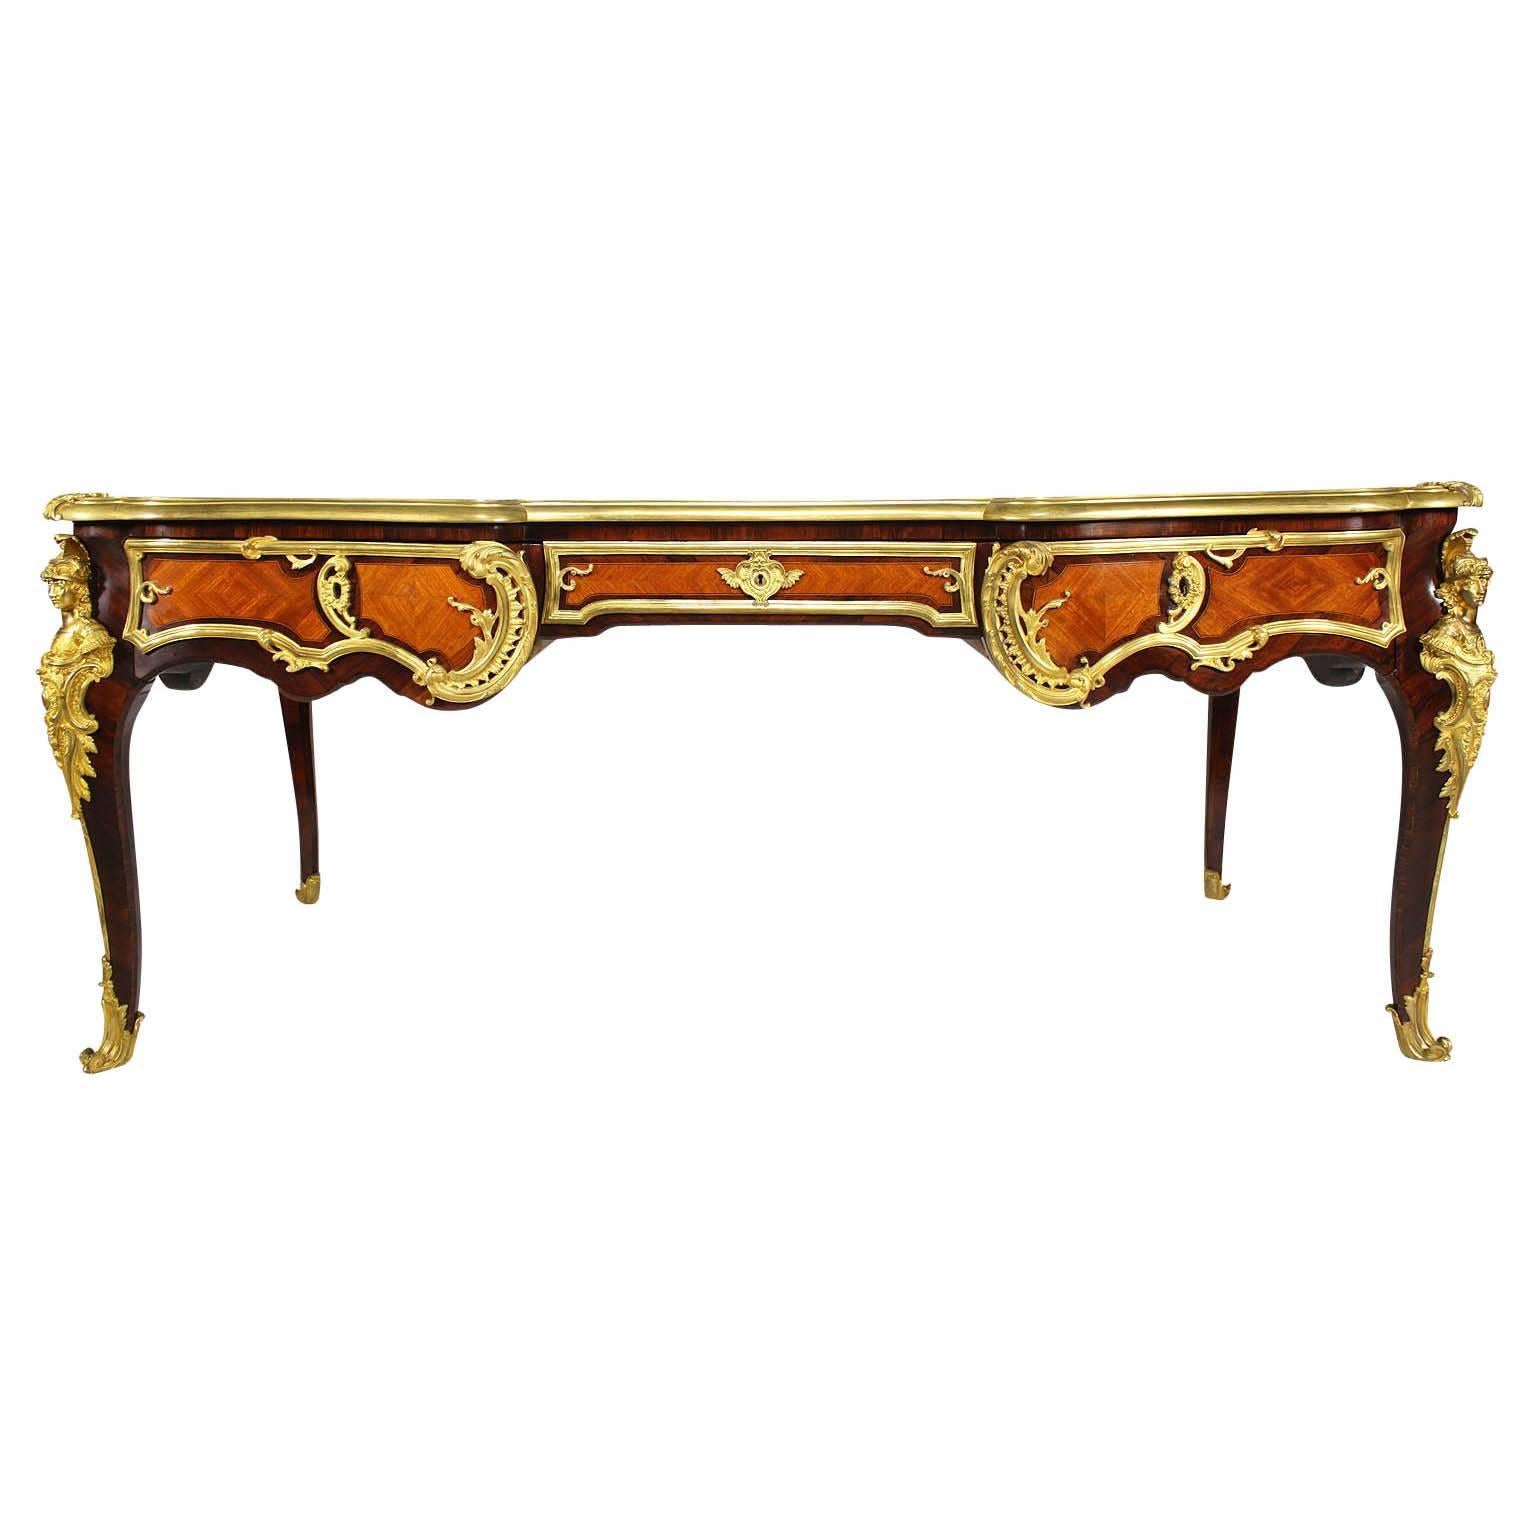 A very fine and large French 19th century Louis XV style gilt bronze-mounted kingwood and walnut bureau plat by H. Conquet after a model by Charles Cressent. The shaped rectangular top inset with a tooled leather writing panel and fitted with three